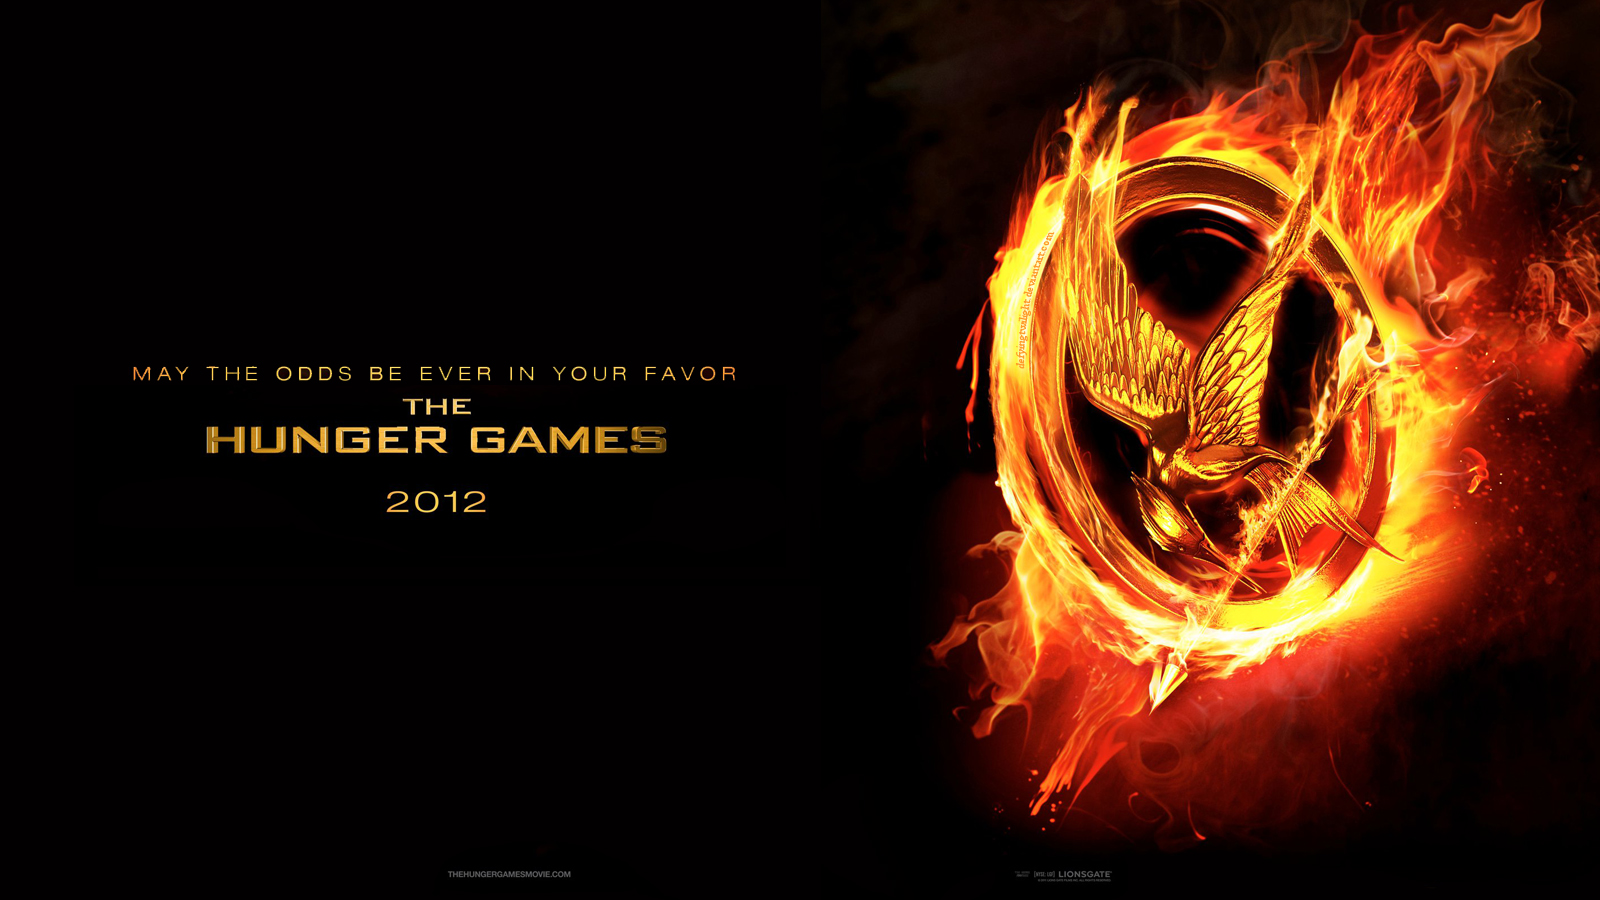 http://4.bp.blogspot.com/-YPJNjZRQ1Sg/T05dLLskecI/AAAAAAAAFYI/5yPDY7GNOYI/s1600/-The-Hunger-Games-Movie-Poster-Wallpapers-the-hunger-games-24129231-1600-900.jpg